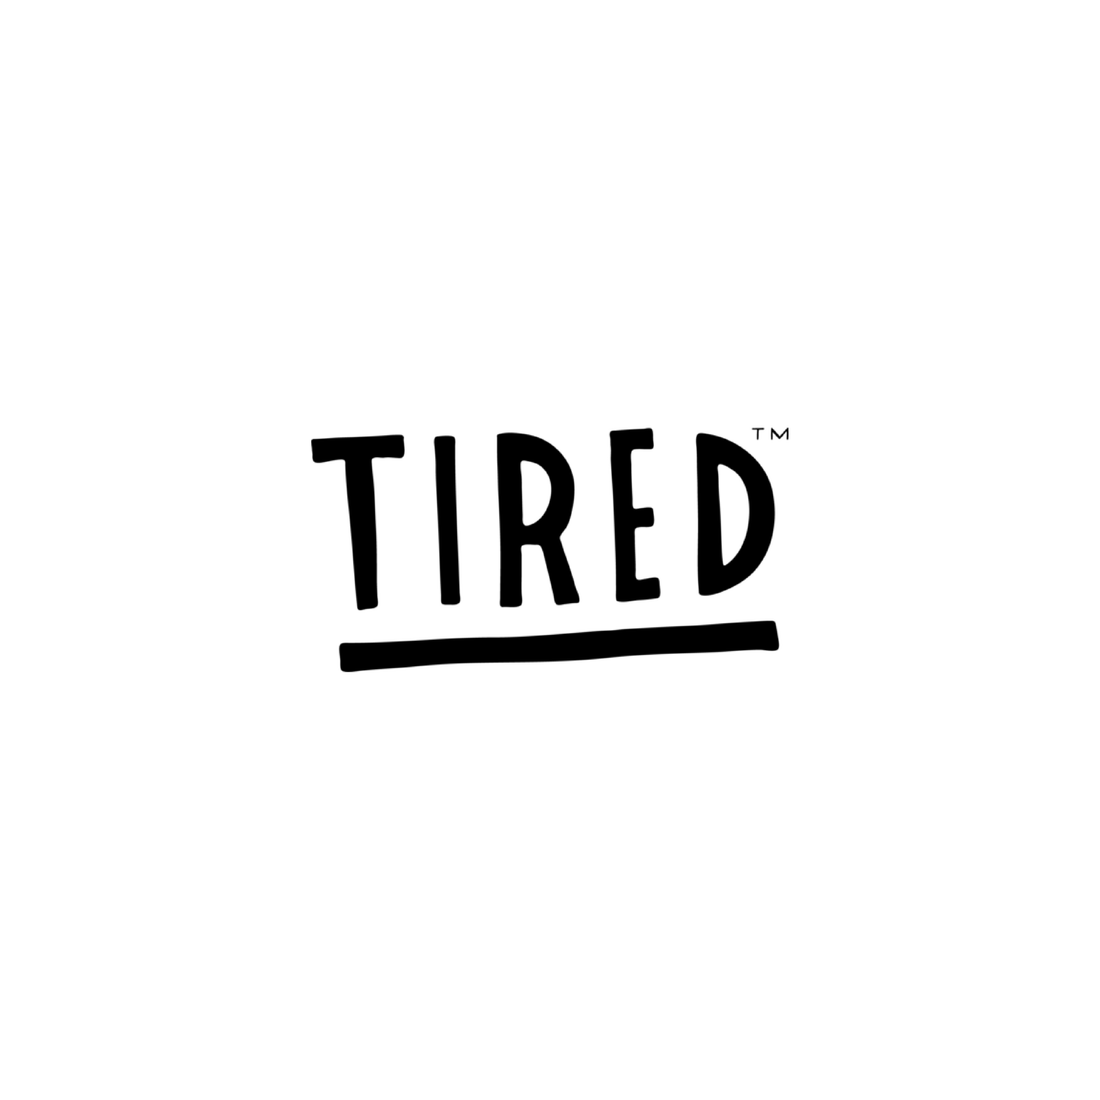  Tired